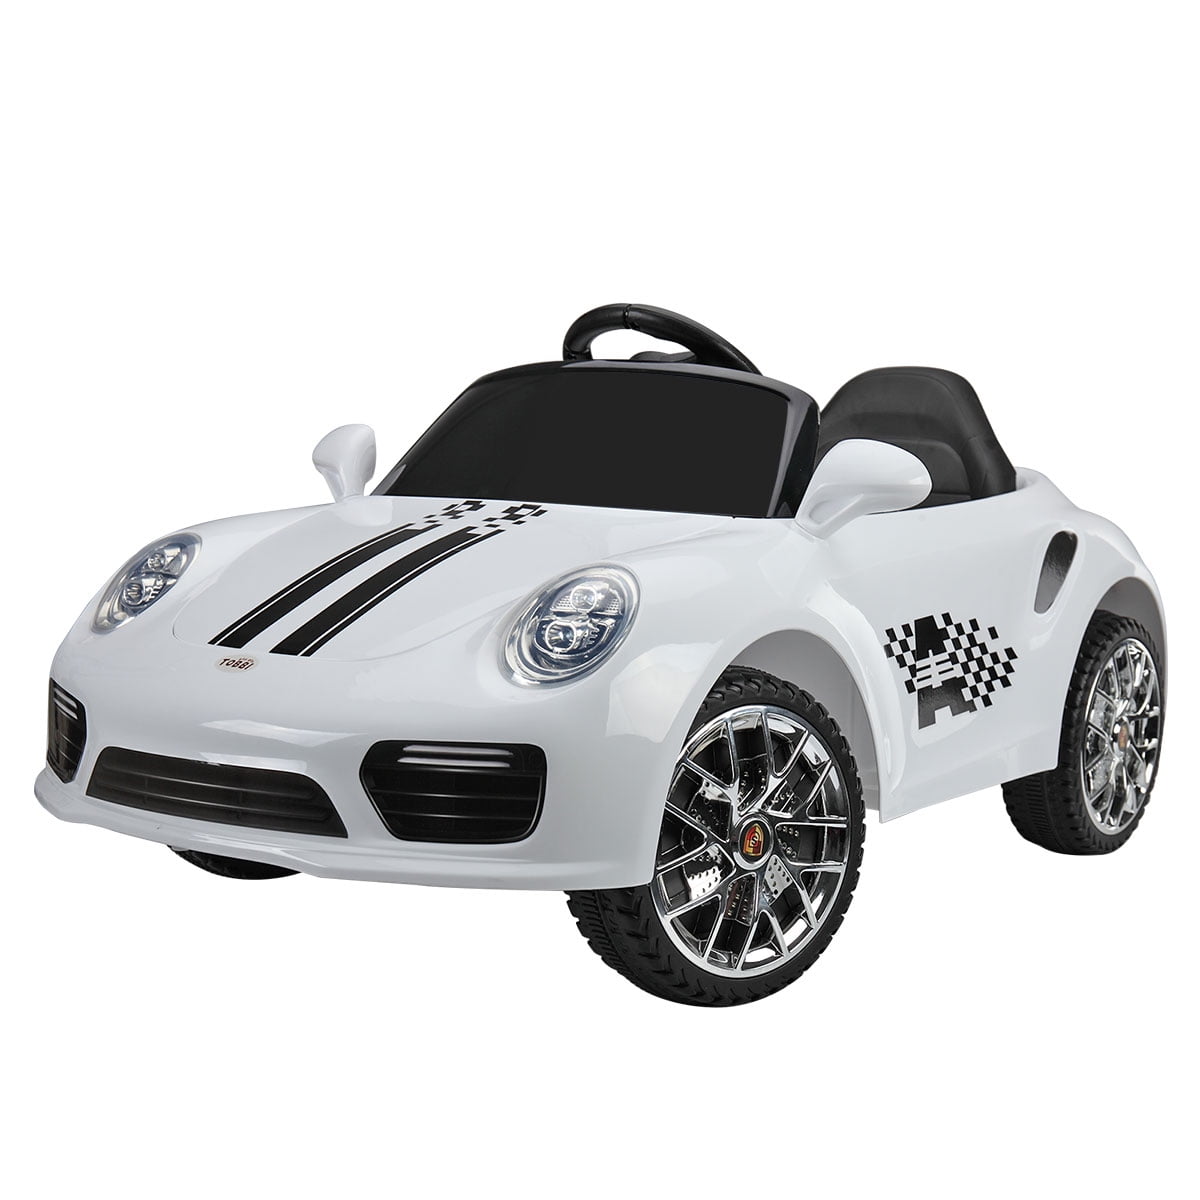 Details about   Kids Ride On Car Children Gift Toys Electric w Remote Control MP3 Black RC 6V